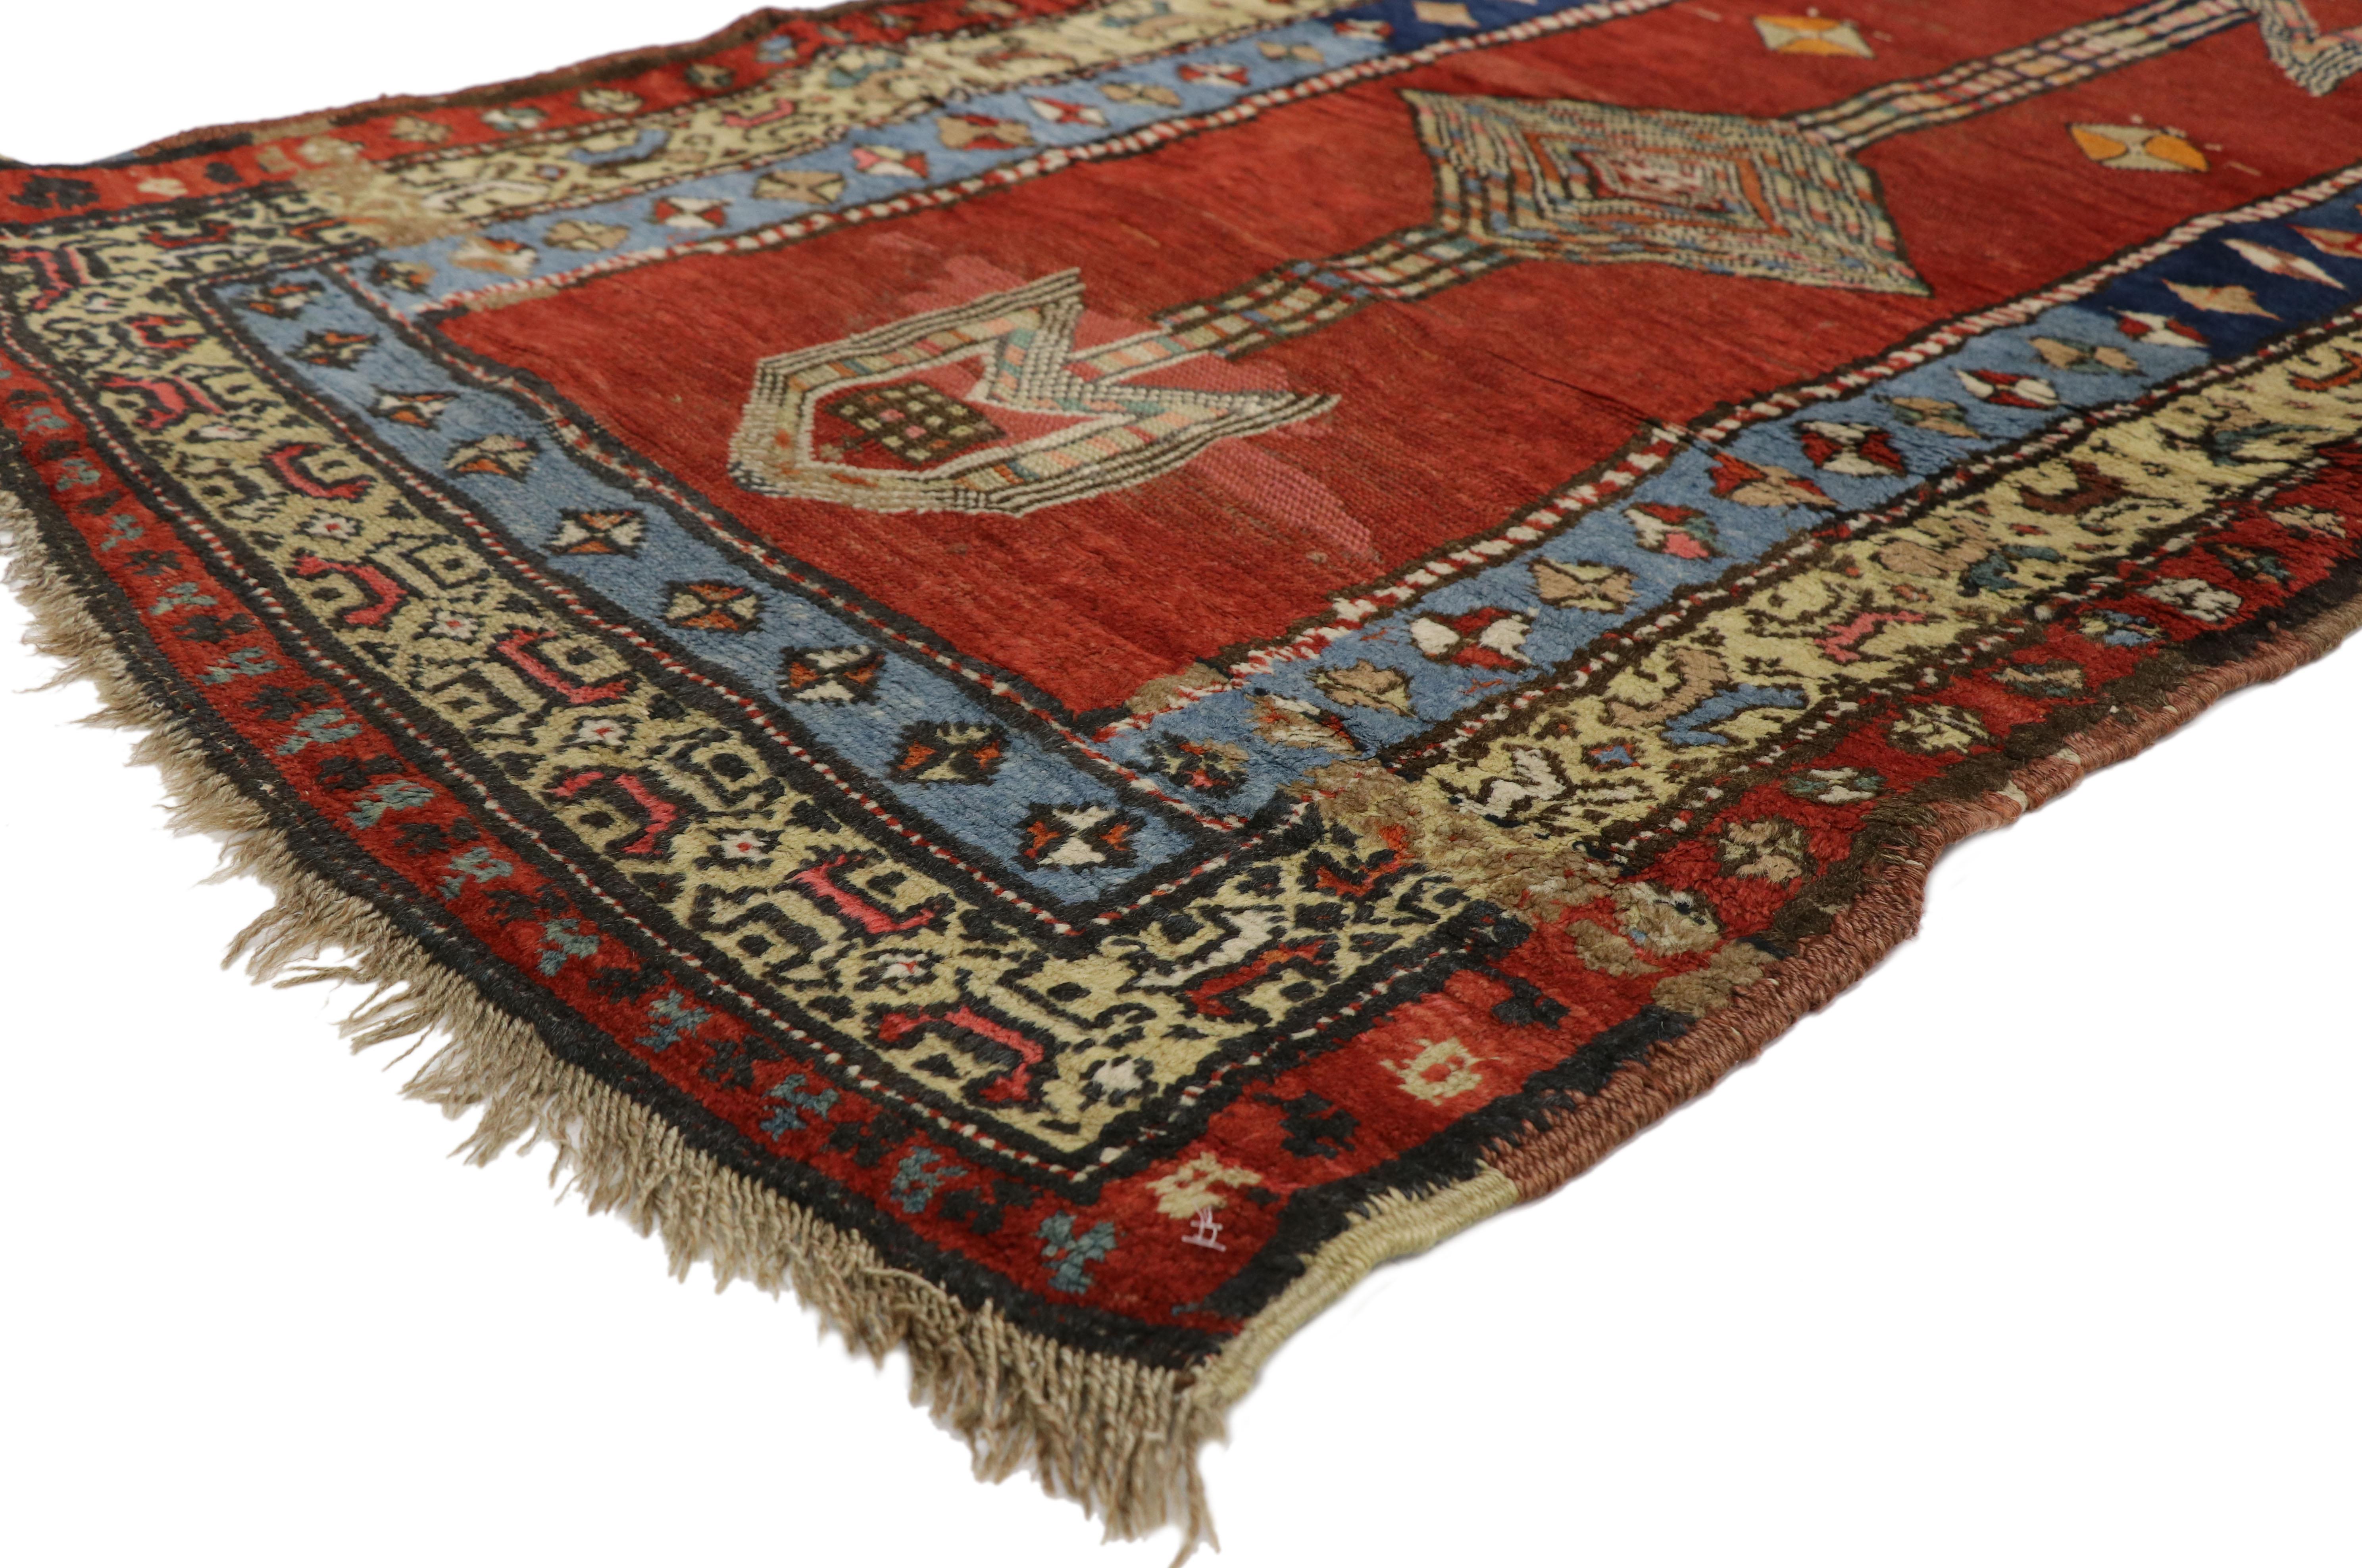 71024 Antique Persian Sarab Runner with Mid-Century Modern Tribal Style. Displaying primitive charm and nomadic tribal style, this hand-knotted wool antique Persian Sarab runner features an angular pole medallion with lozenges and extended anchor